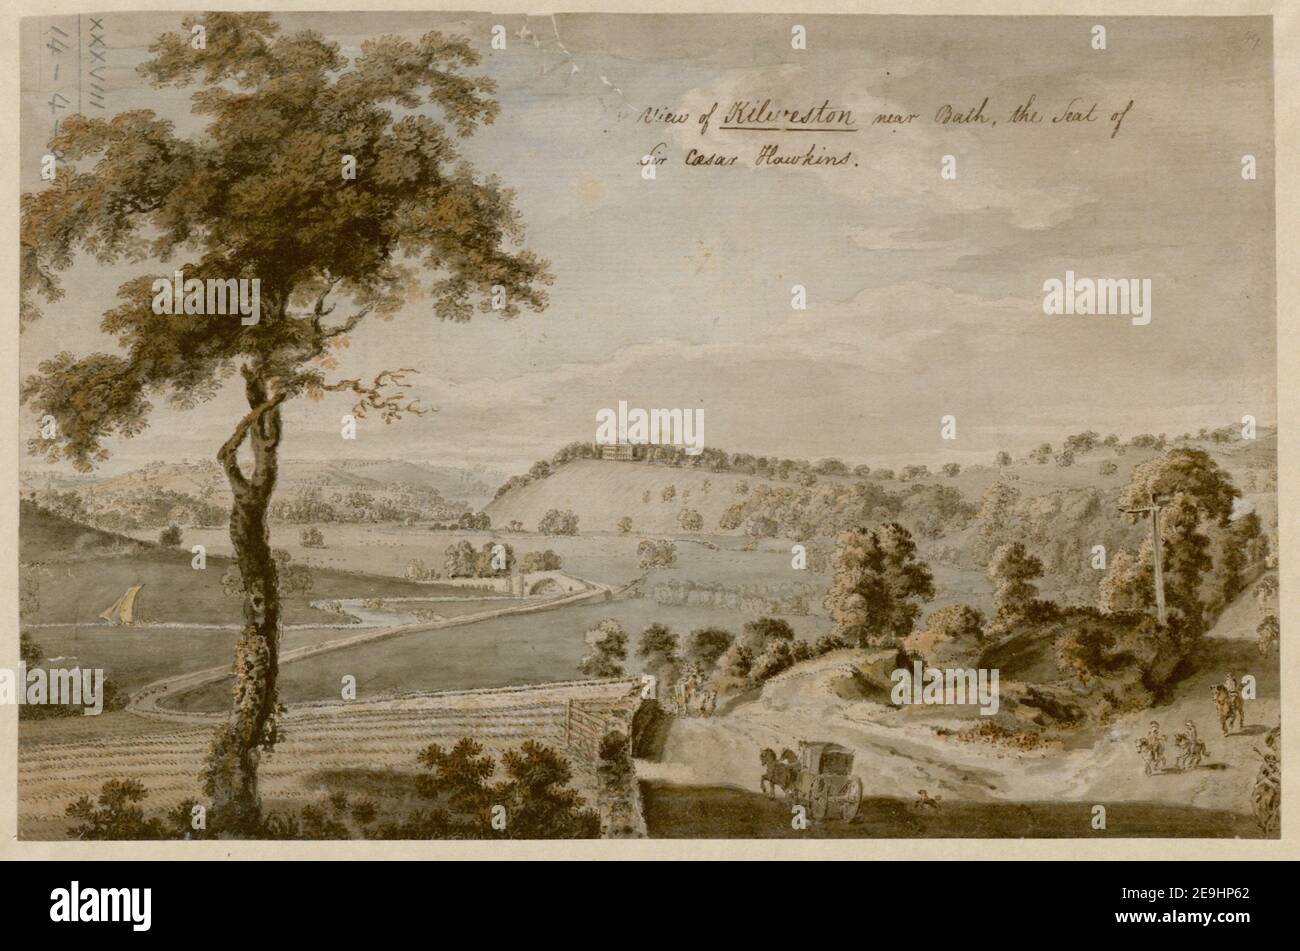 View of Kilweston near Bath, the Seat of Sir Caesar Hawkins. Visual Material information:  Title: View of Kilweston near Bath, the Seat of Sir Caesar Hawkins. 38.14.4.a. Date of publication: [between 1770-1786]  Item type: 1 drawing Medium: pen and black ink with watercolour Dimensions: sheet 17.1 x 26.2 cm  Former owner: George III, King of Great Britain, 1738-1820 Stock Photo